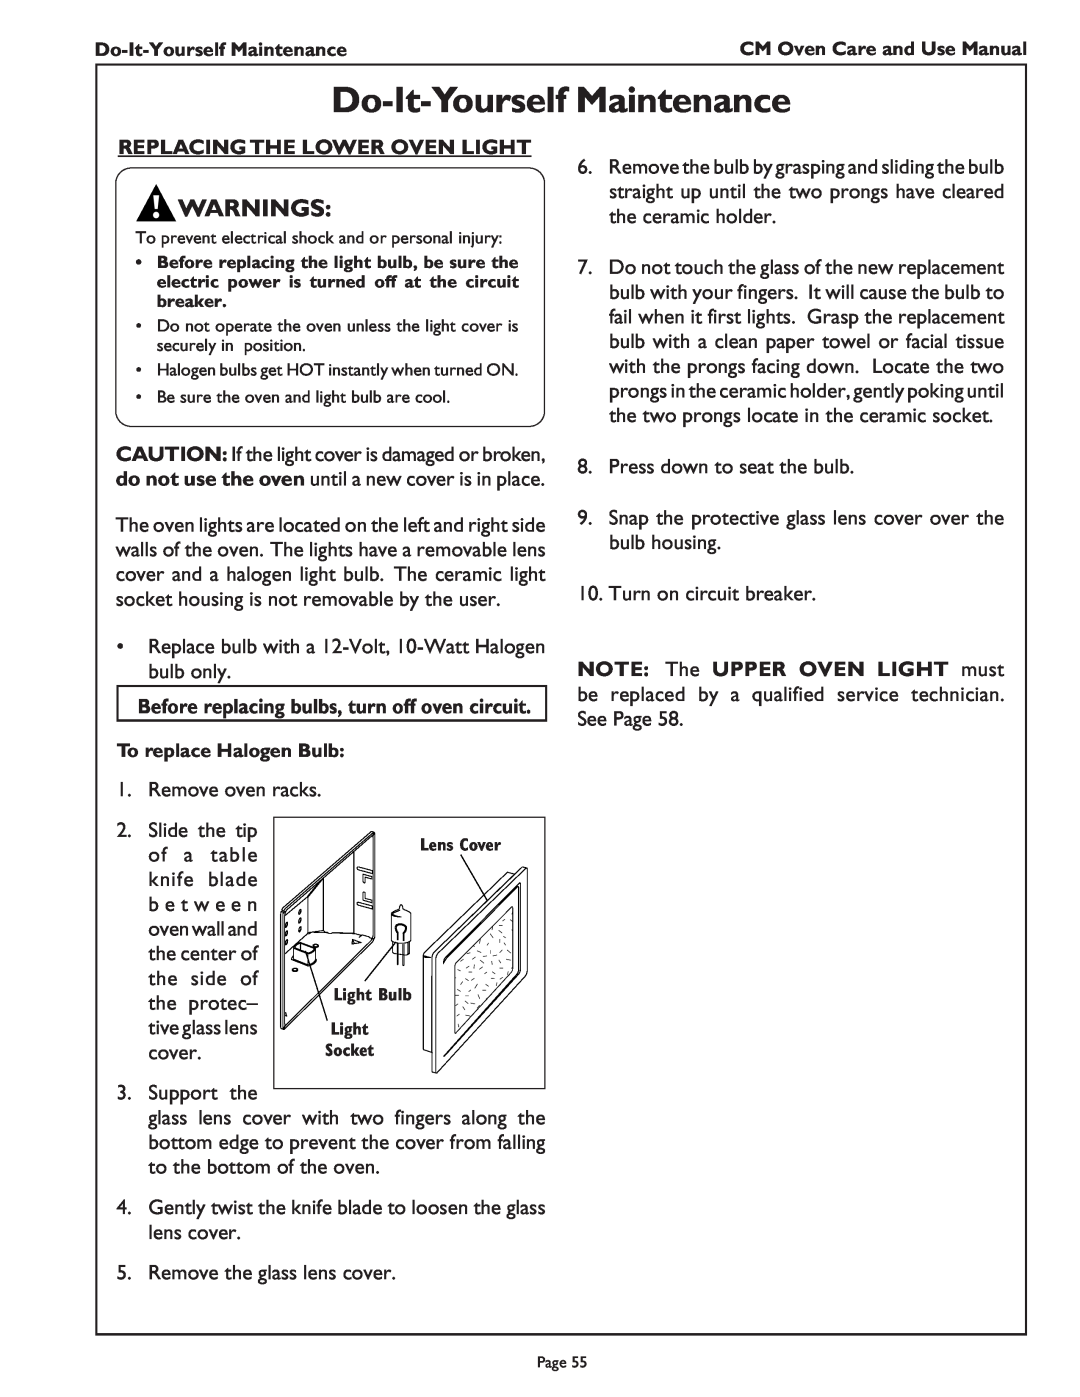 Thermador CM302 manual Warnings, Do-It-Yourself Maintenance, Replacing The Lower Oven Light 